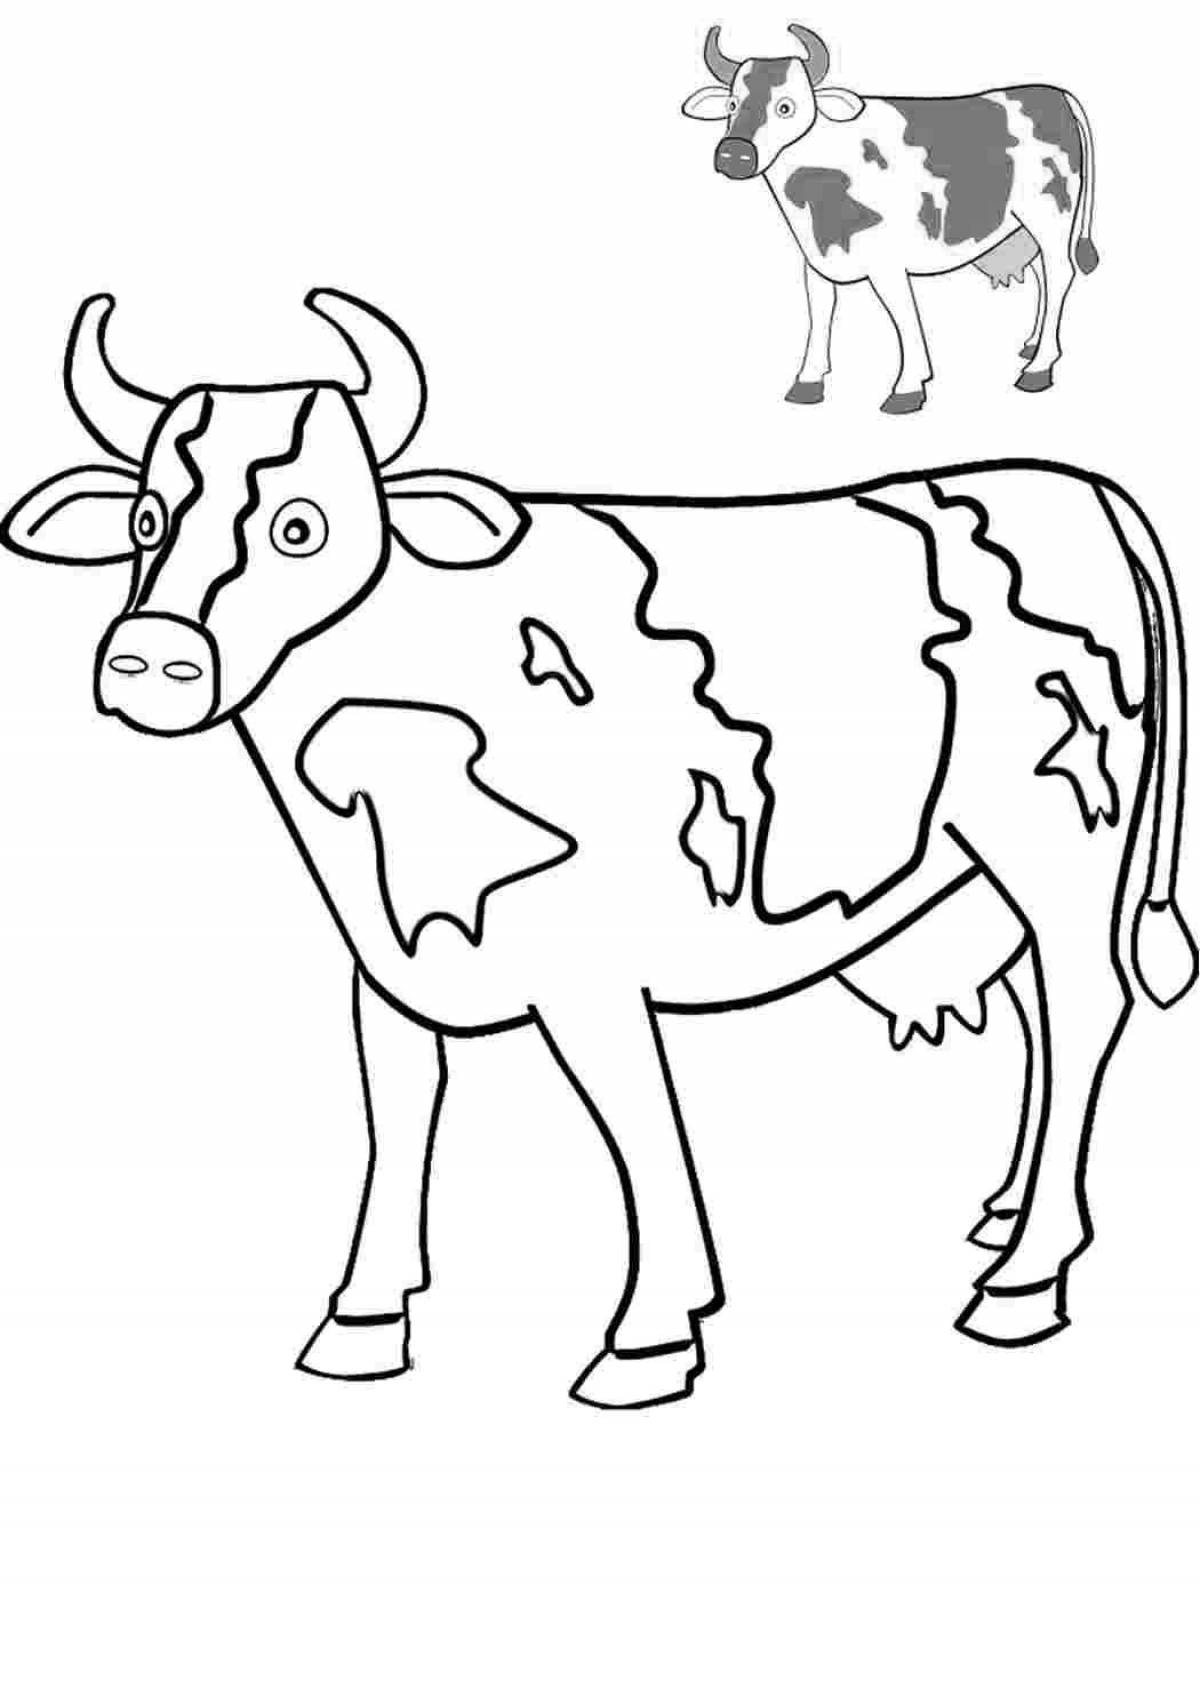 Colorful cow coloring for preschoolers